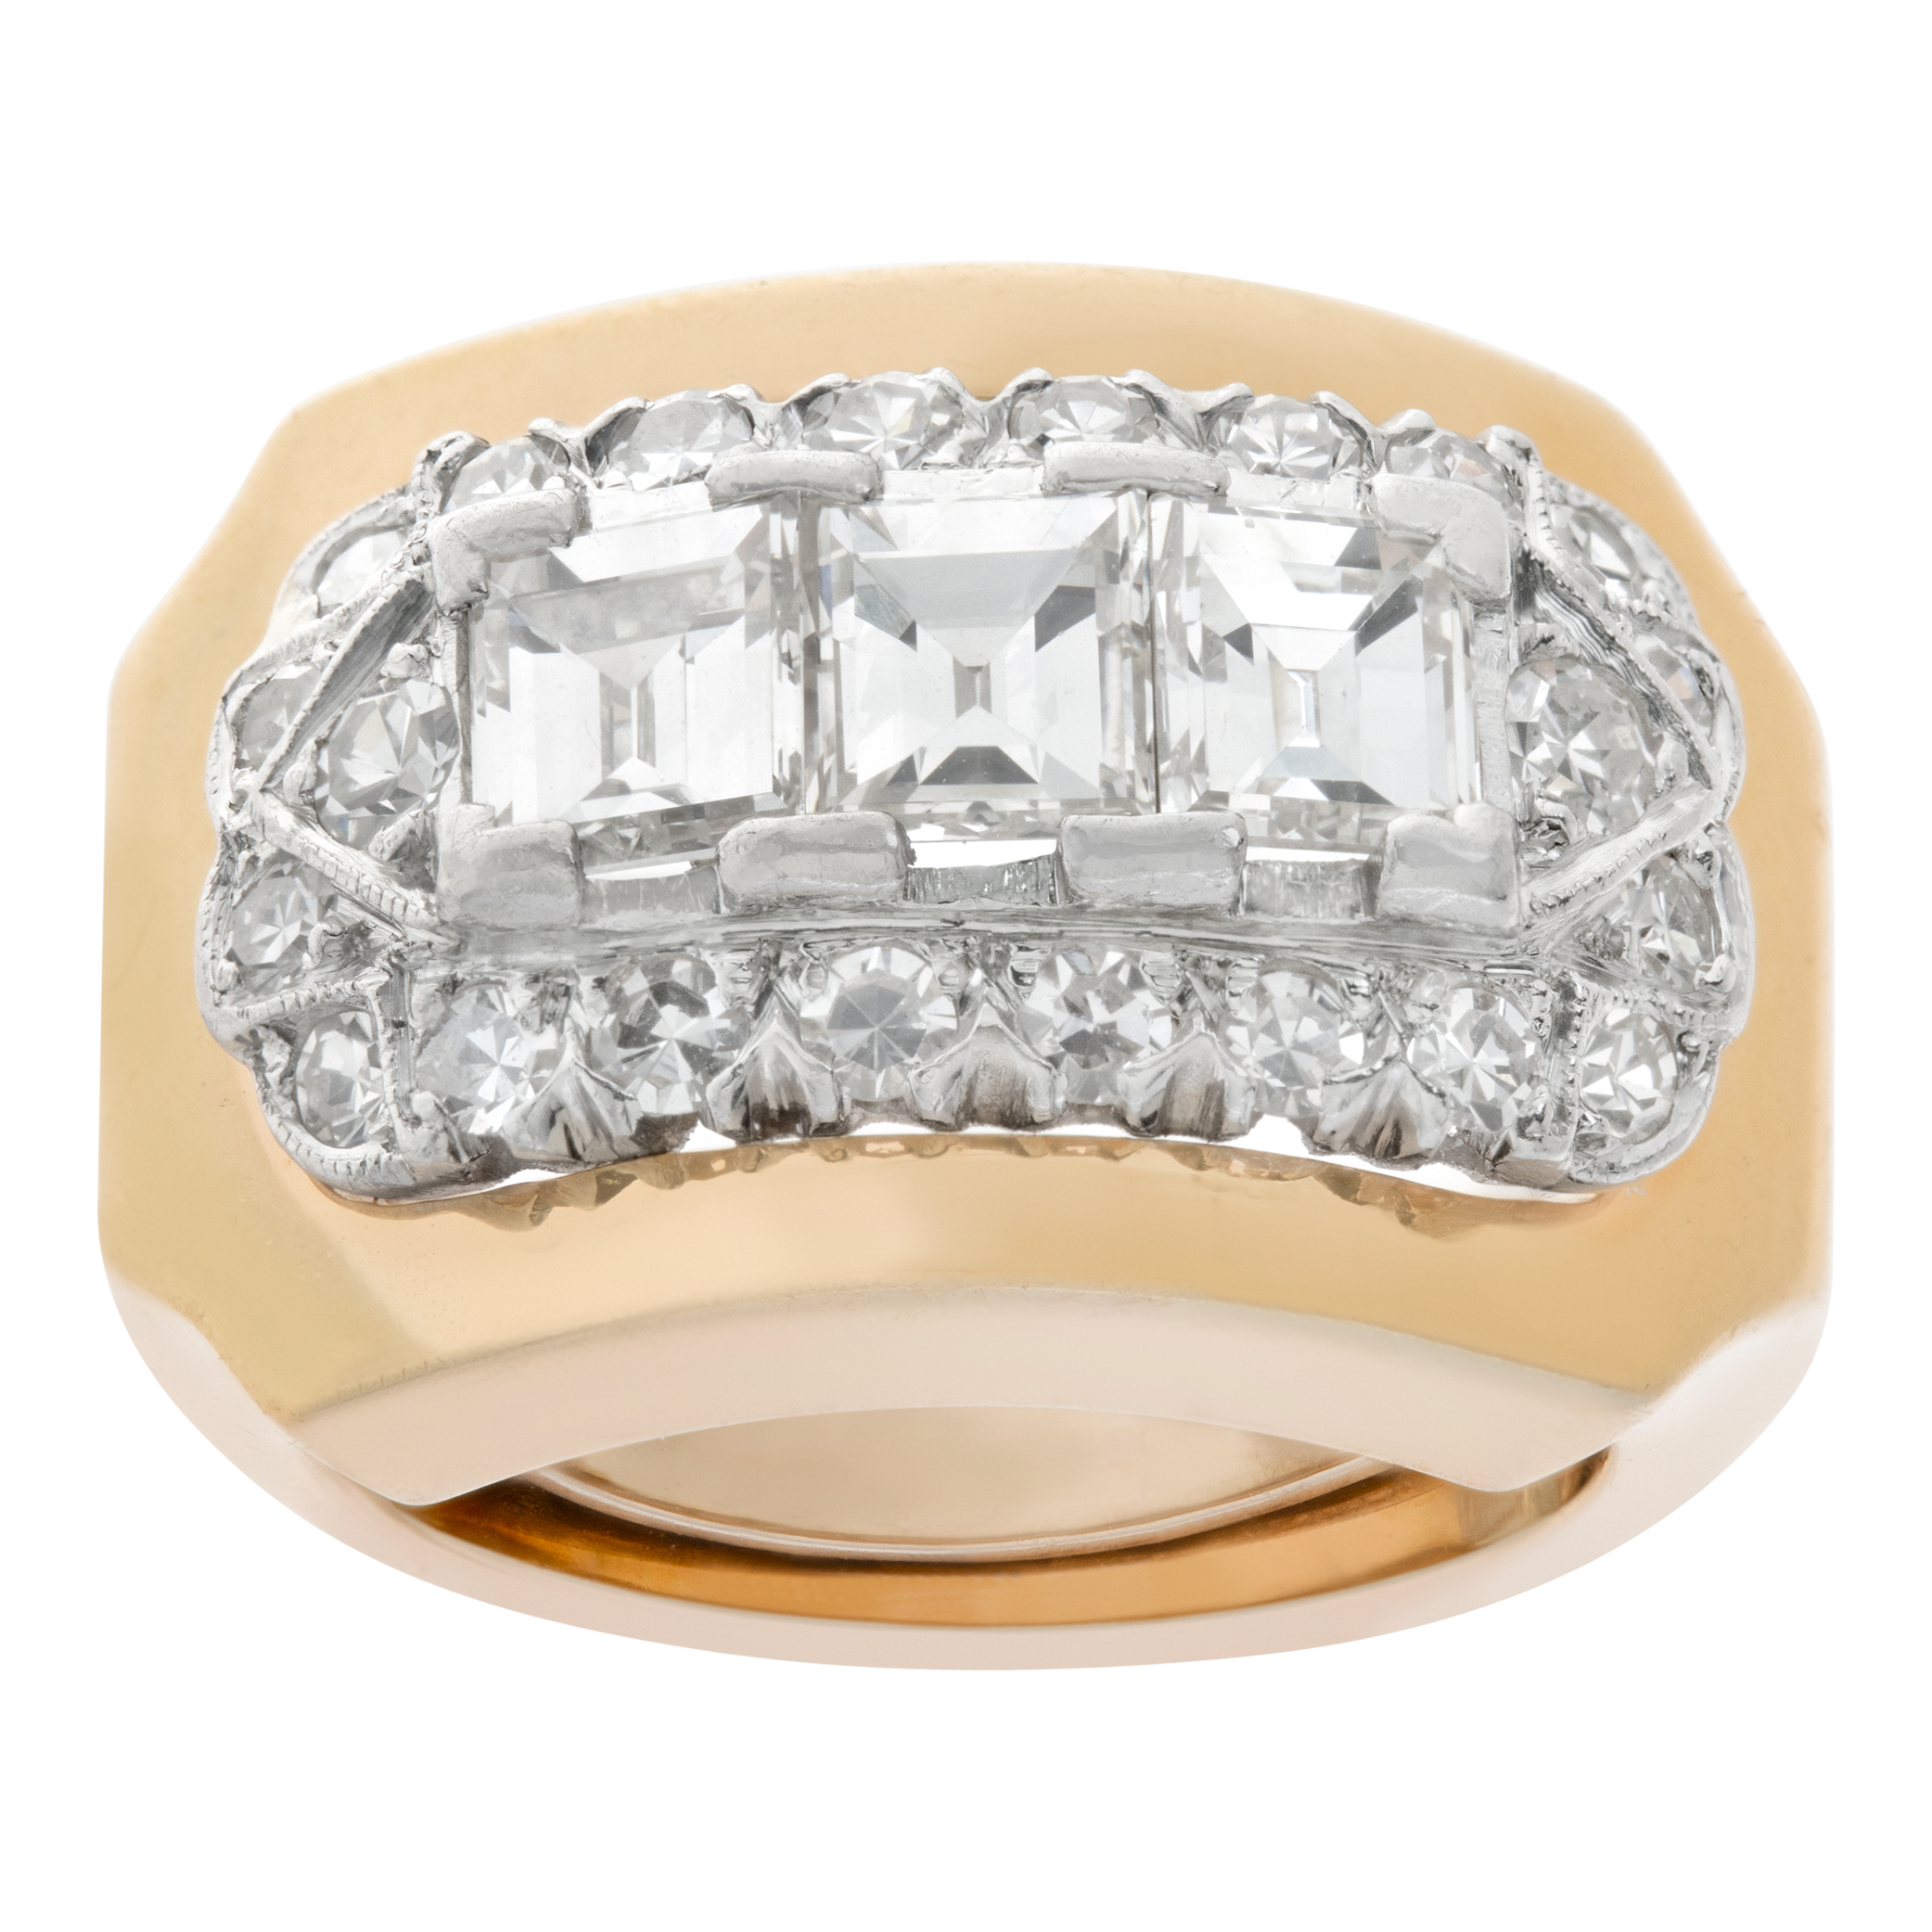 3 GIA Certified, Rectangular step cut diamonds (Total approx. weight: 1.30 carat), set in platinum & 14k yellow gold ring, surrounded by 22 briliant cut diamonds (total approx. weight: 1.00 carat)